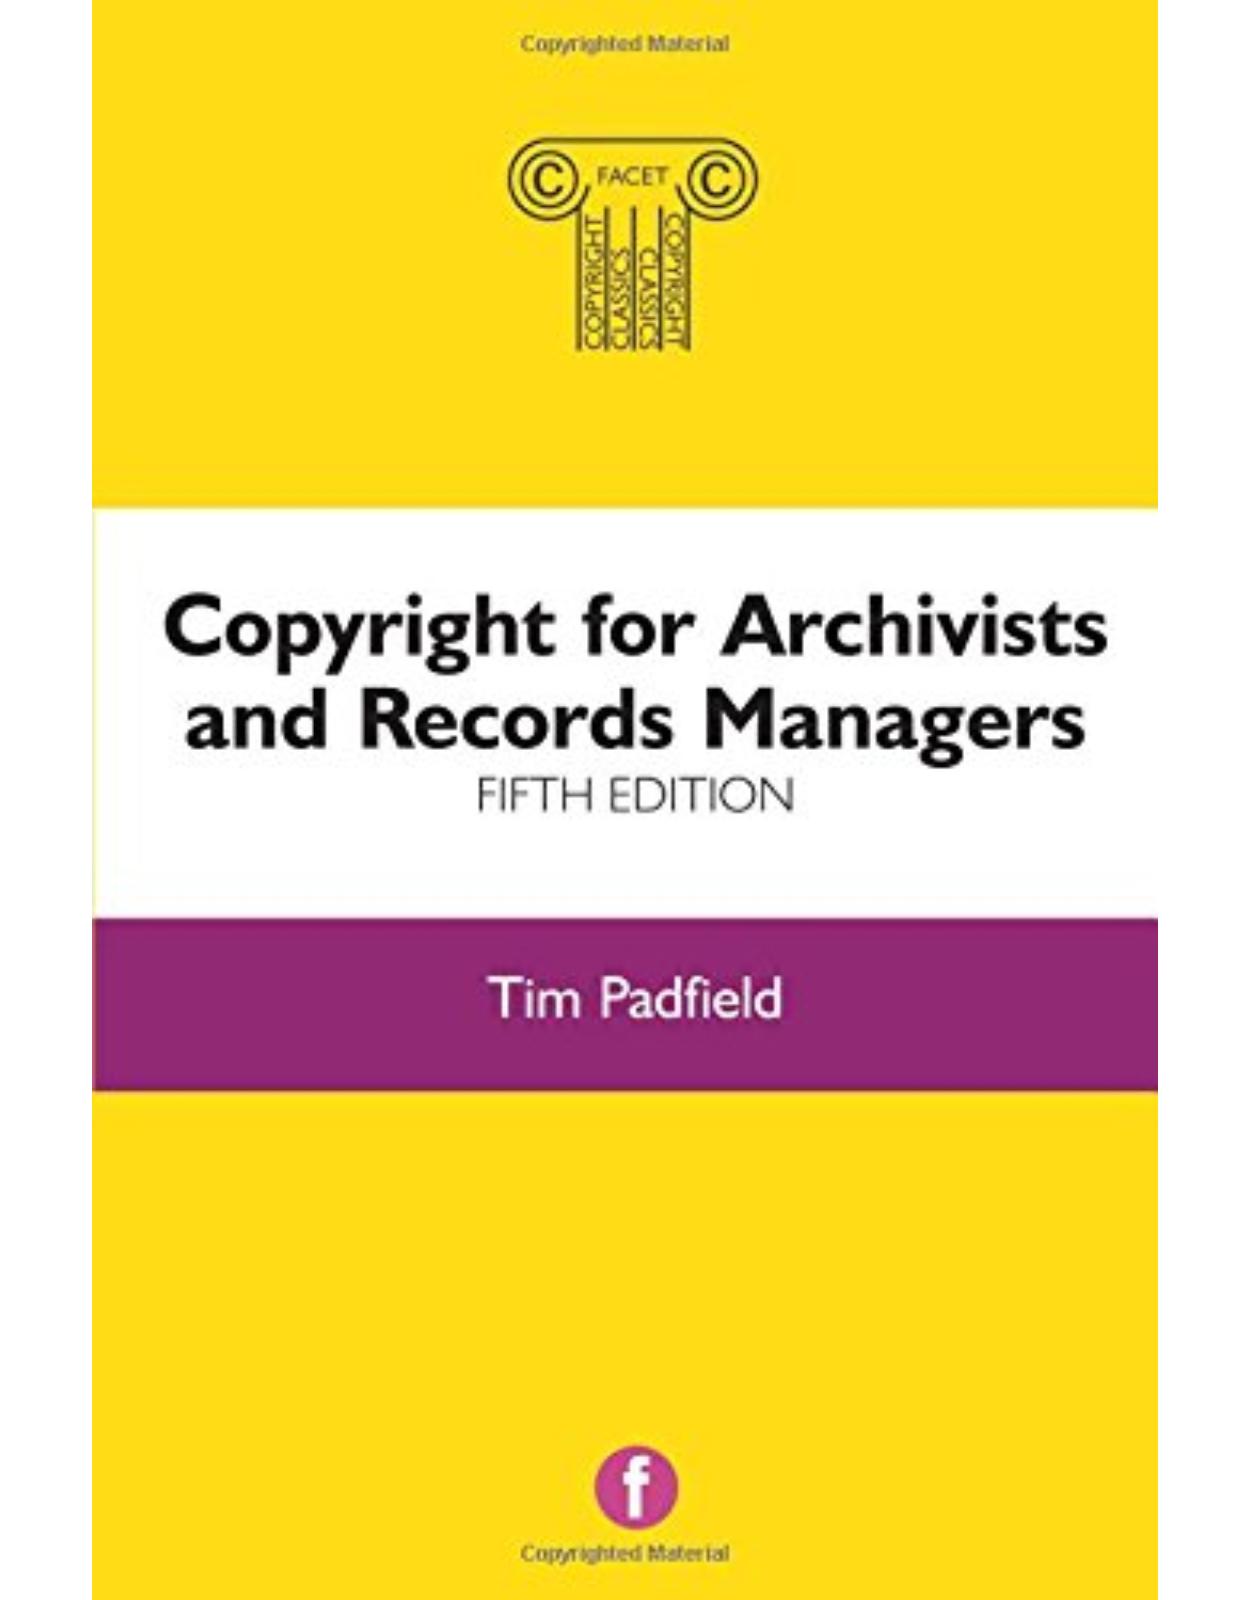 The Facet Copyright Collection: Copyright for Archivists and Records Managers